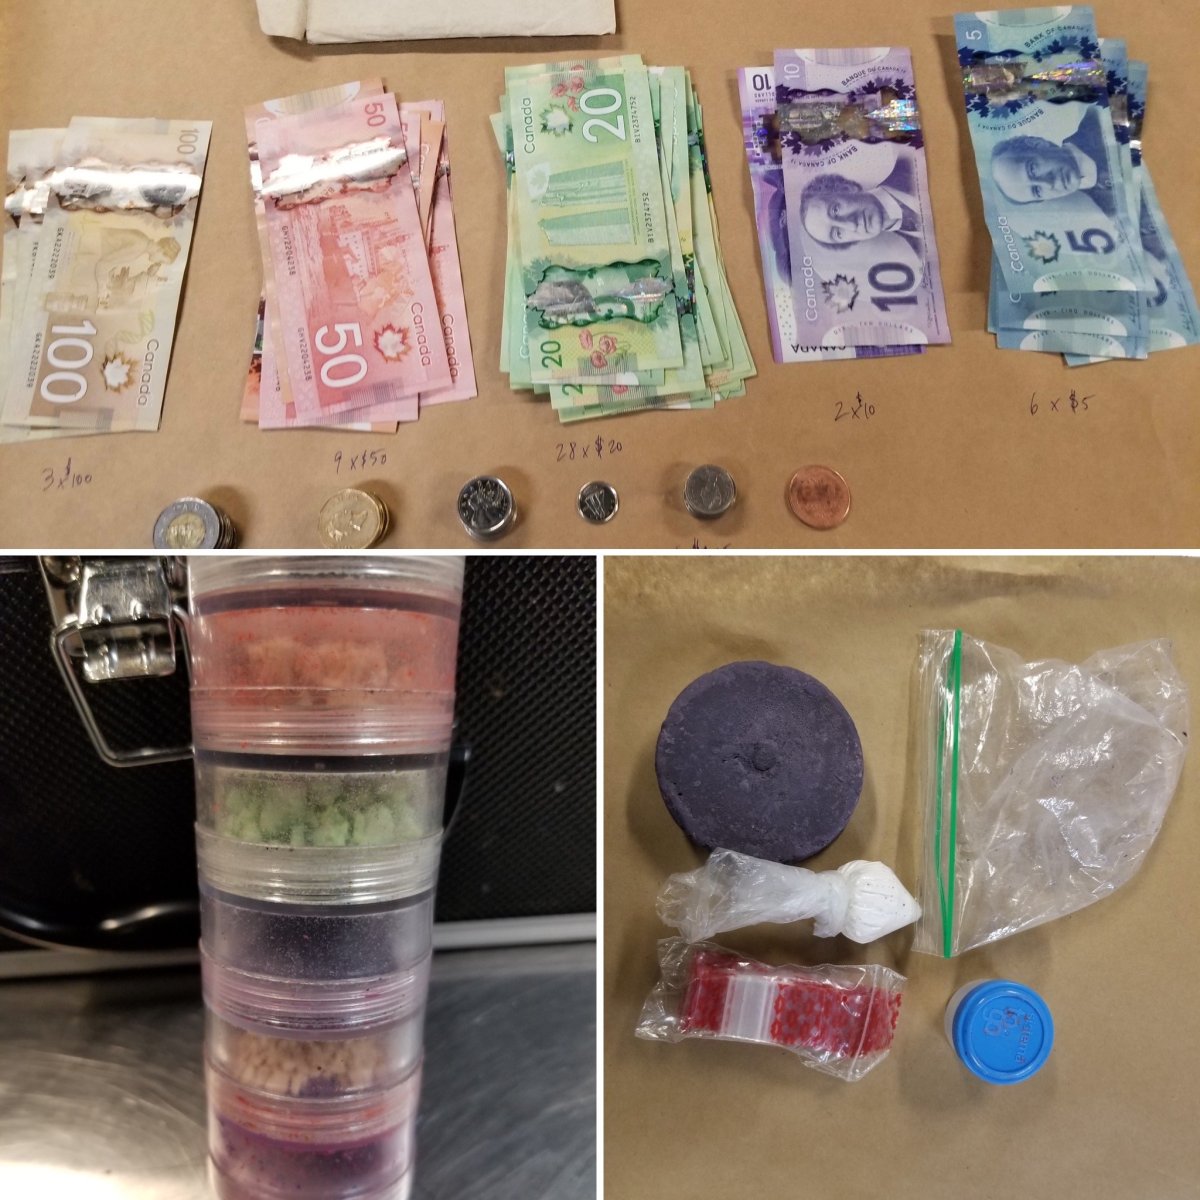 Lake Country RCMP said during a search of the vehicle, significant quantities of suspected illicit drugs were seized, including fentanyl, methamphetamine and cocaine.